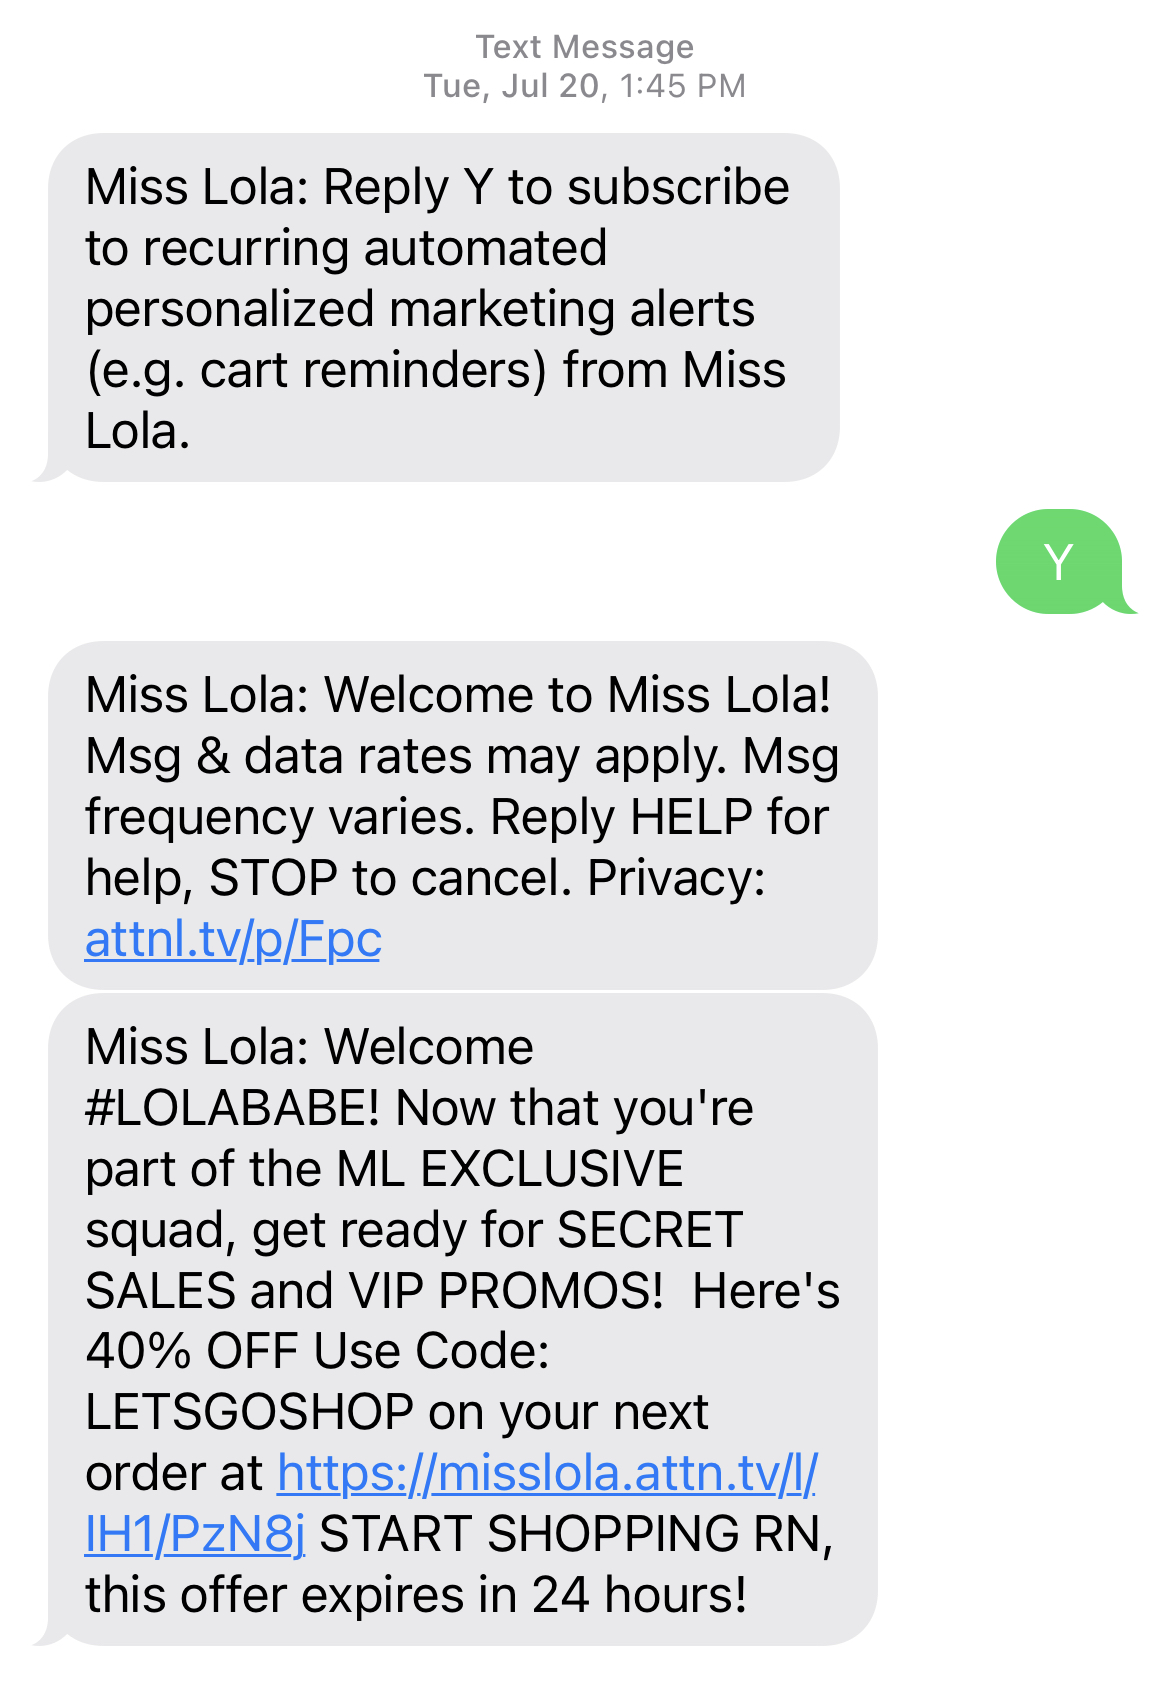 SMS Example | Text Message Marketing